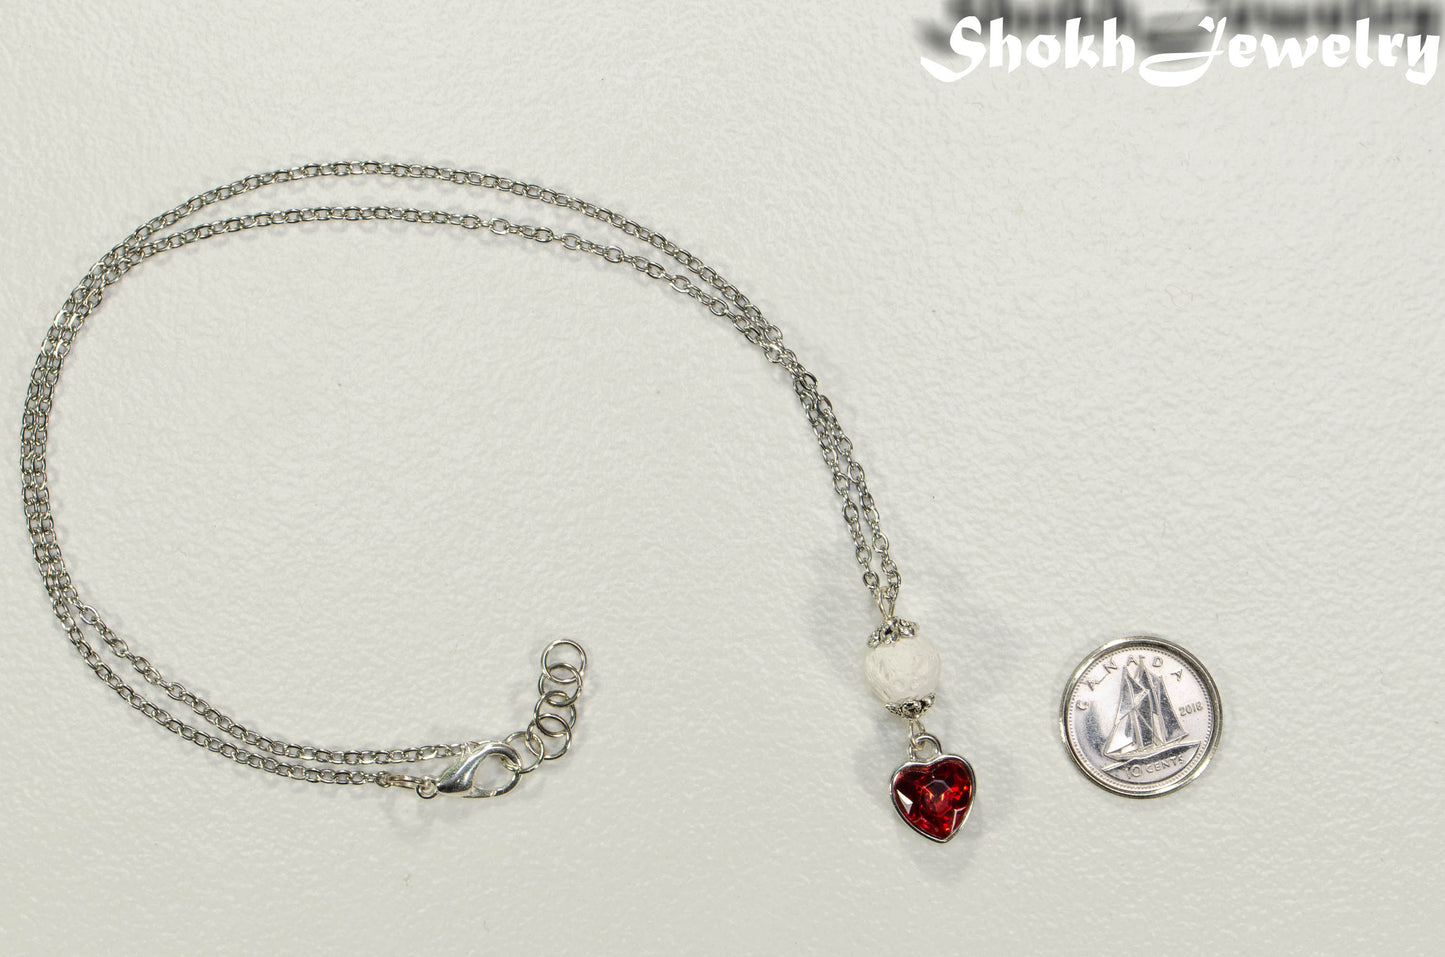 Lava Rock and Heart Shaped July Birthstone Choker Necklace beside a dime.